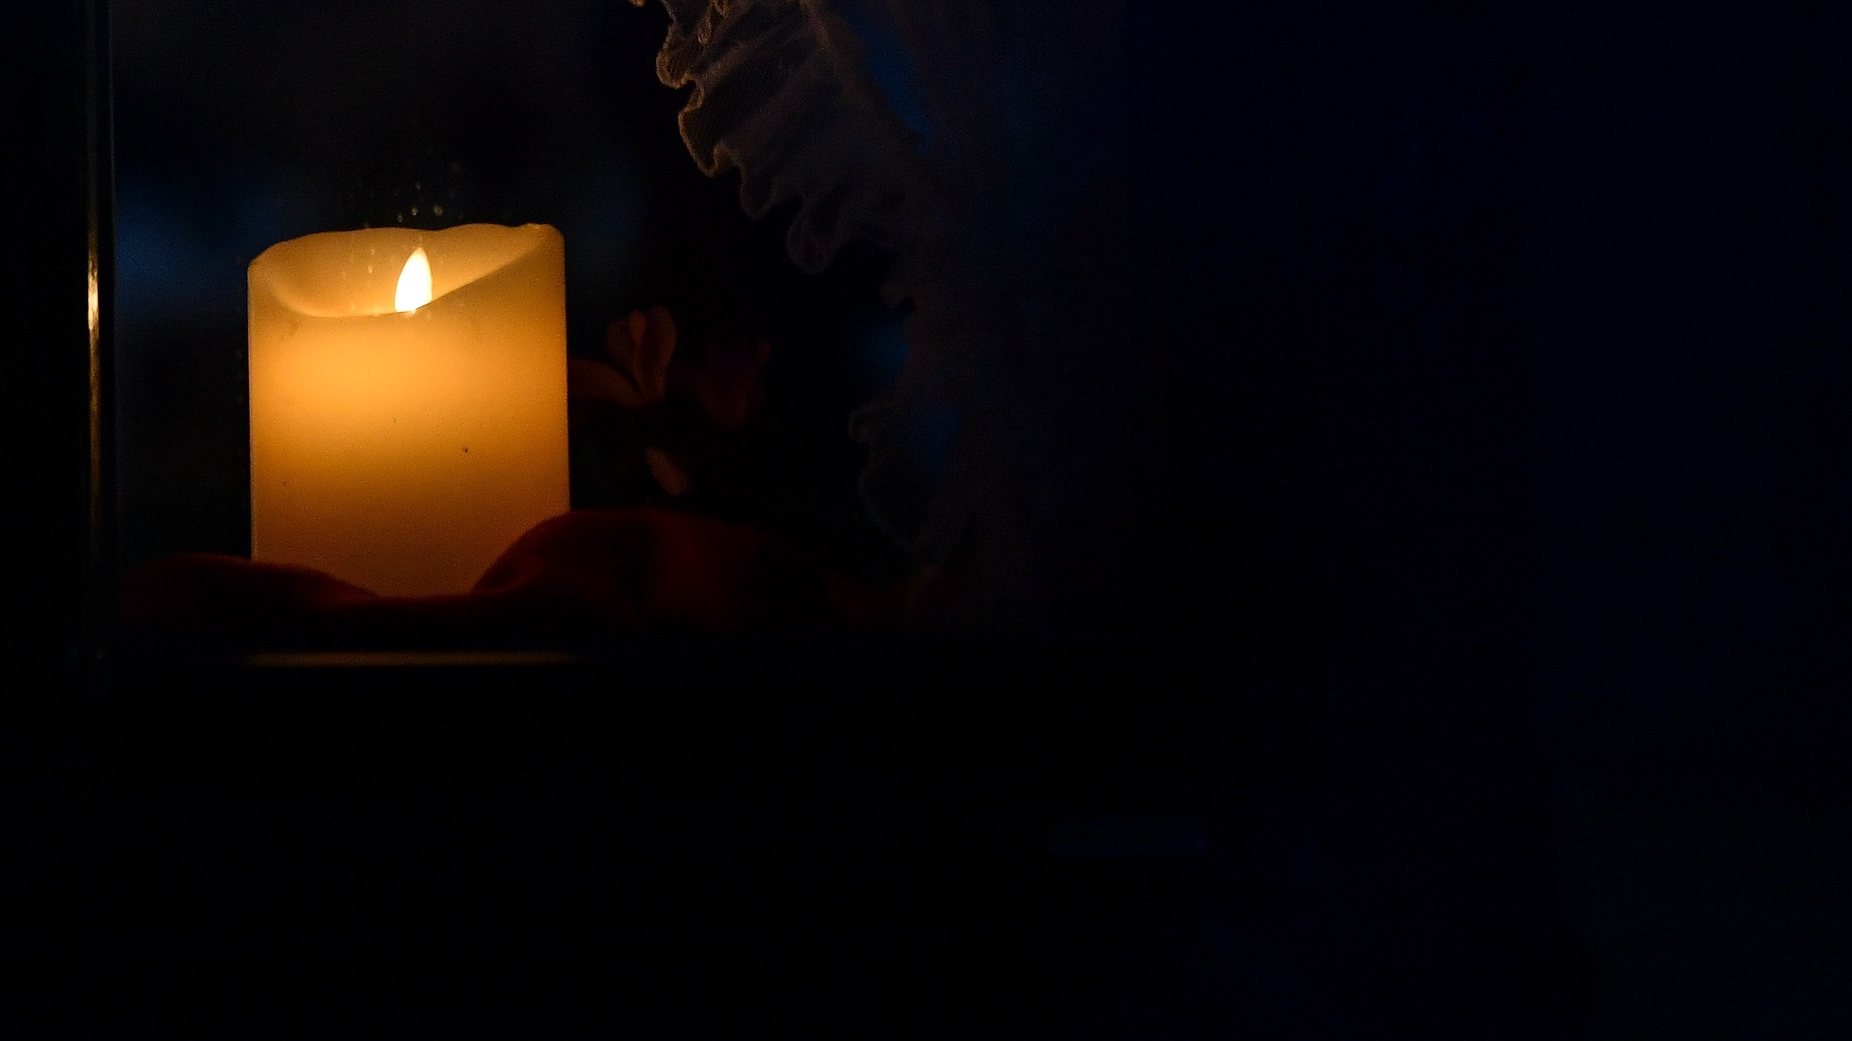 epa08958377 A candle is seen in a window at dawn in Garmisch-Partenkirchen, Germany, 22 January 2021. German President Steinmeier initiated the nationwide &#039;Lichtfenster&#039; (light window) campaign in memory of the victims of the COVID-19 coronavirus pandemic, encouraging citizens to show their mourning and solidarity by lighting a candle in their window or near their house.  EPA/PHILIPP GUELLAND